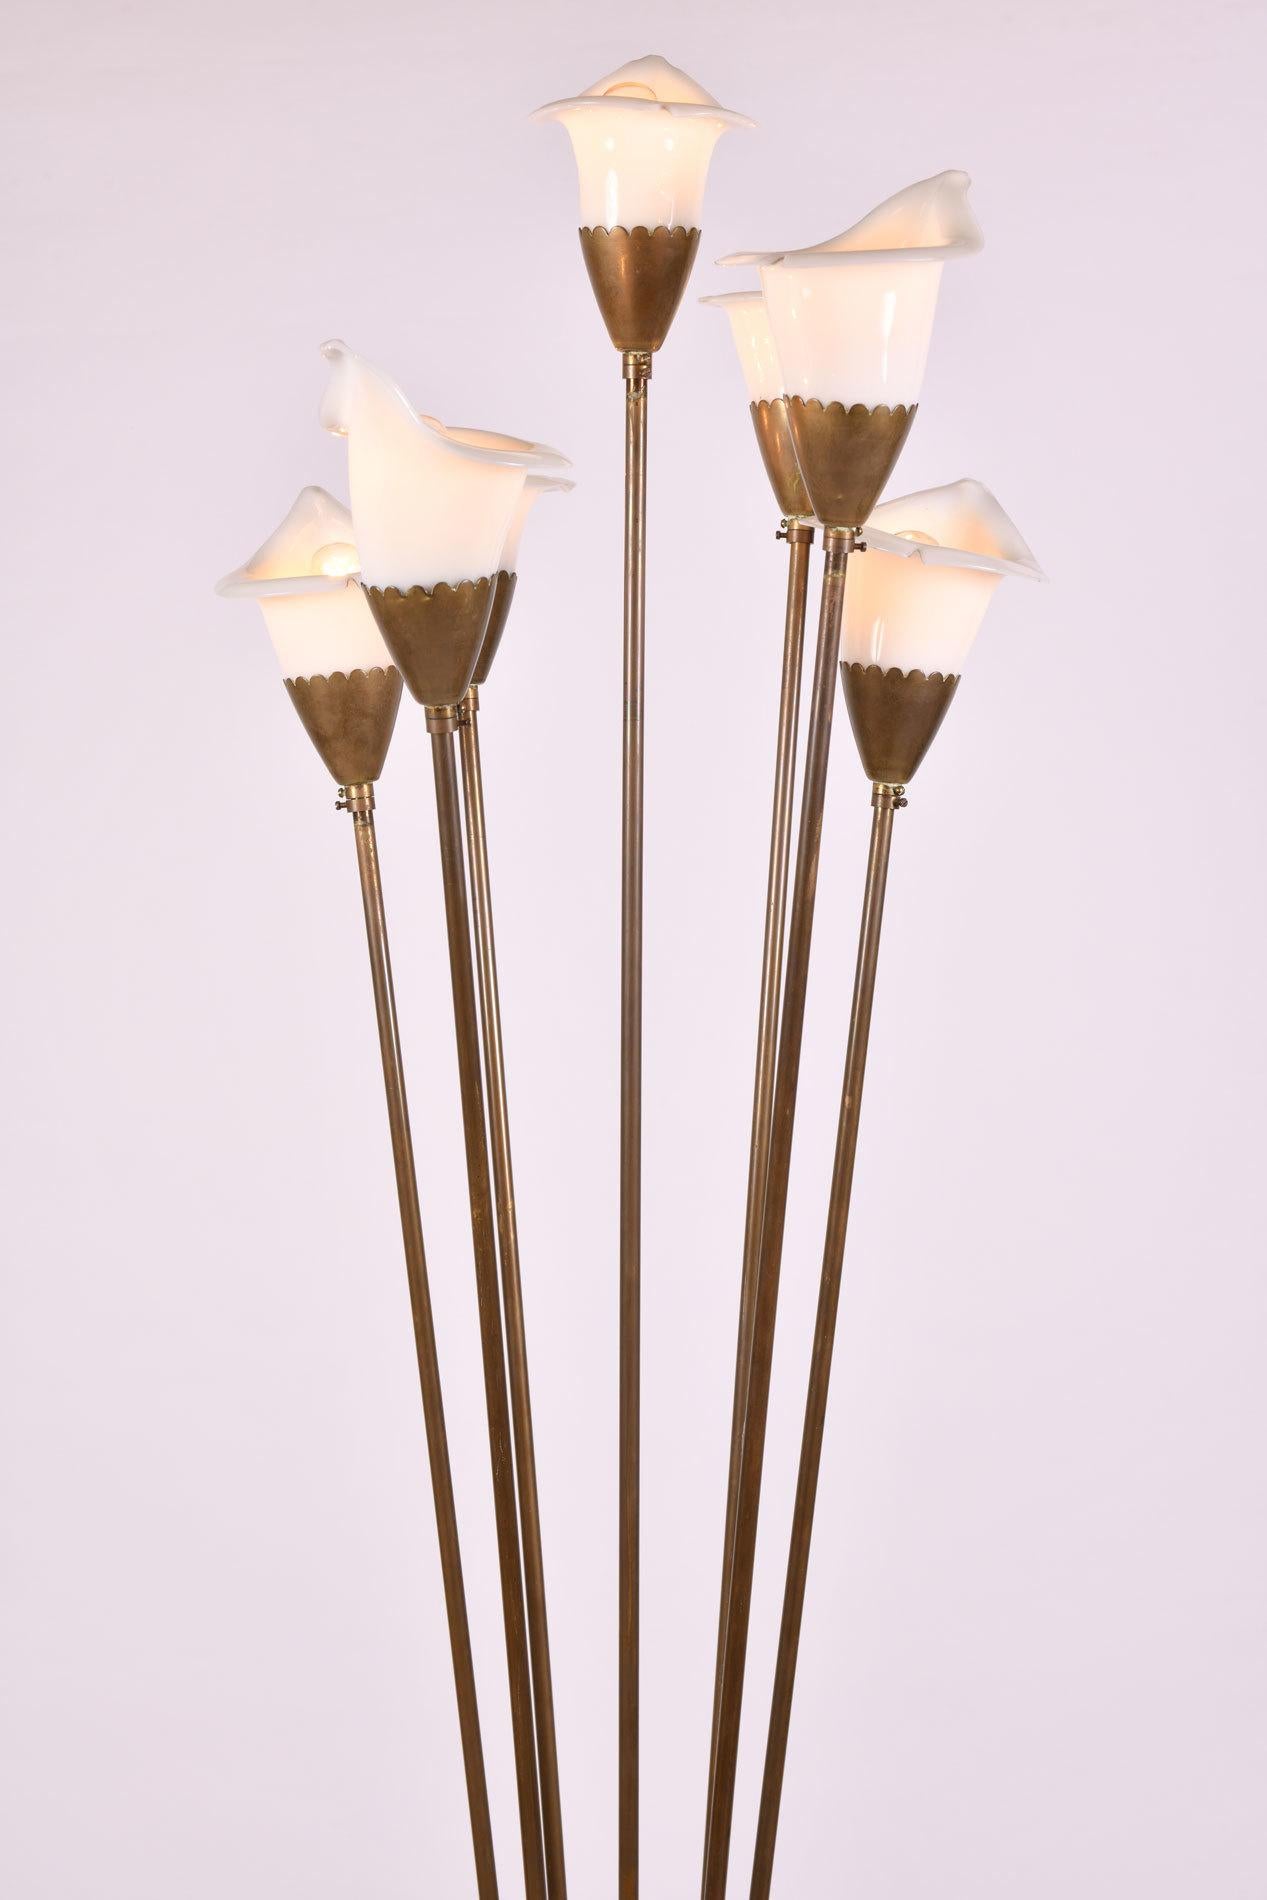 Dramatic seven lilies of hand blown white glass each on a straight brass stem emanating from a double-conical copper vase detailed in brass. Italian, early 1950s.

Angelo Lelli was an influential and important Italian designer of furniture and